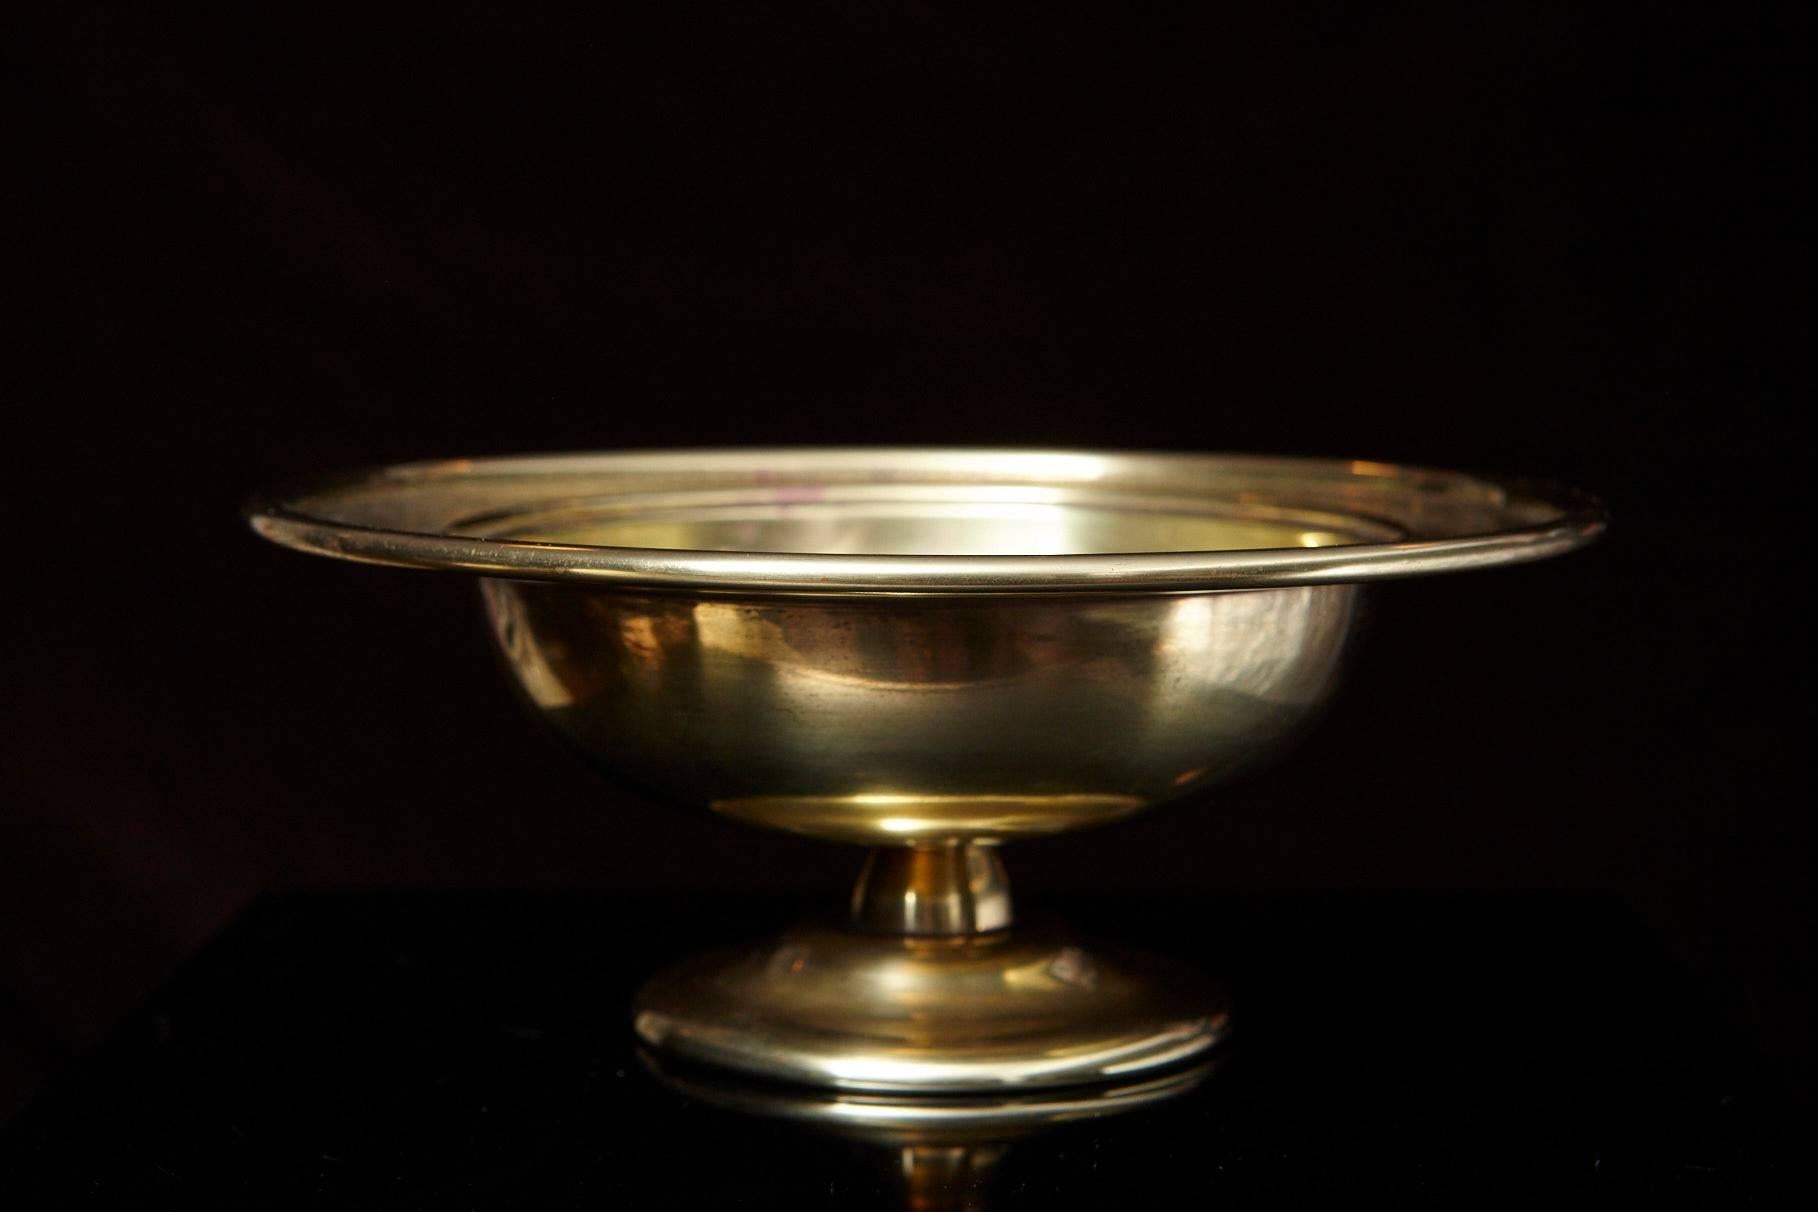 Louis C. Tiffany Furnaces Inc. favrile bronze bowl raised on circular foot, with rounded gallery, monogram in centre and dated 1880-1930.
Foundry marks in two places: Louis C. Tiffany Furnaces, Inc., Favrile 300A
Recalling the Old English word